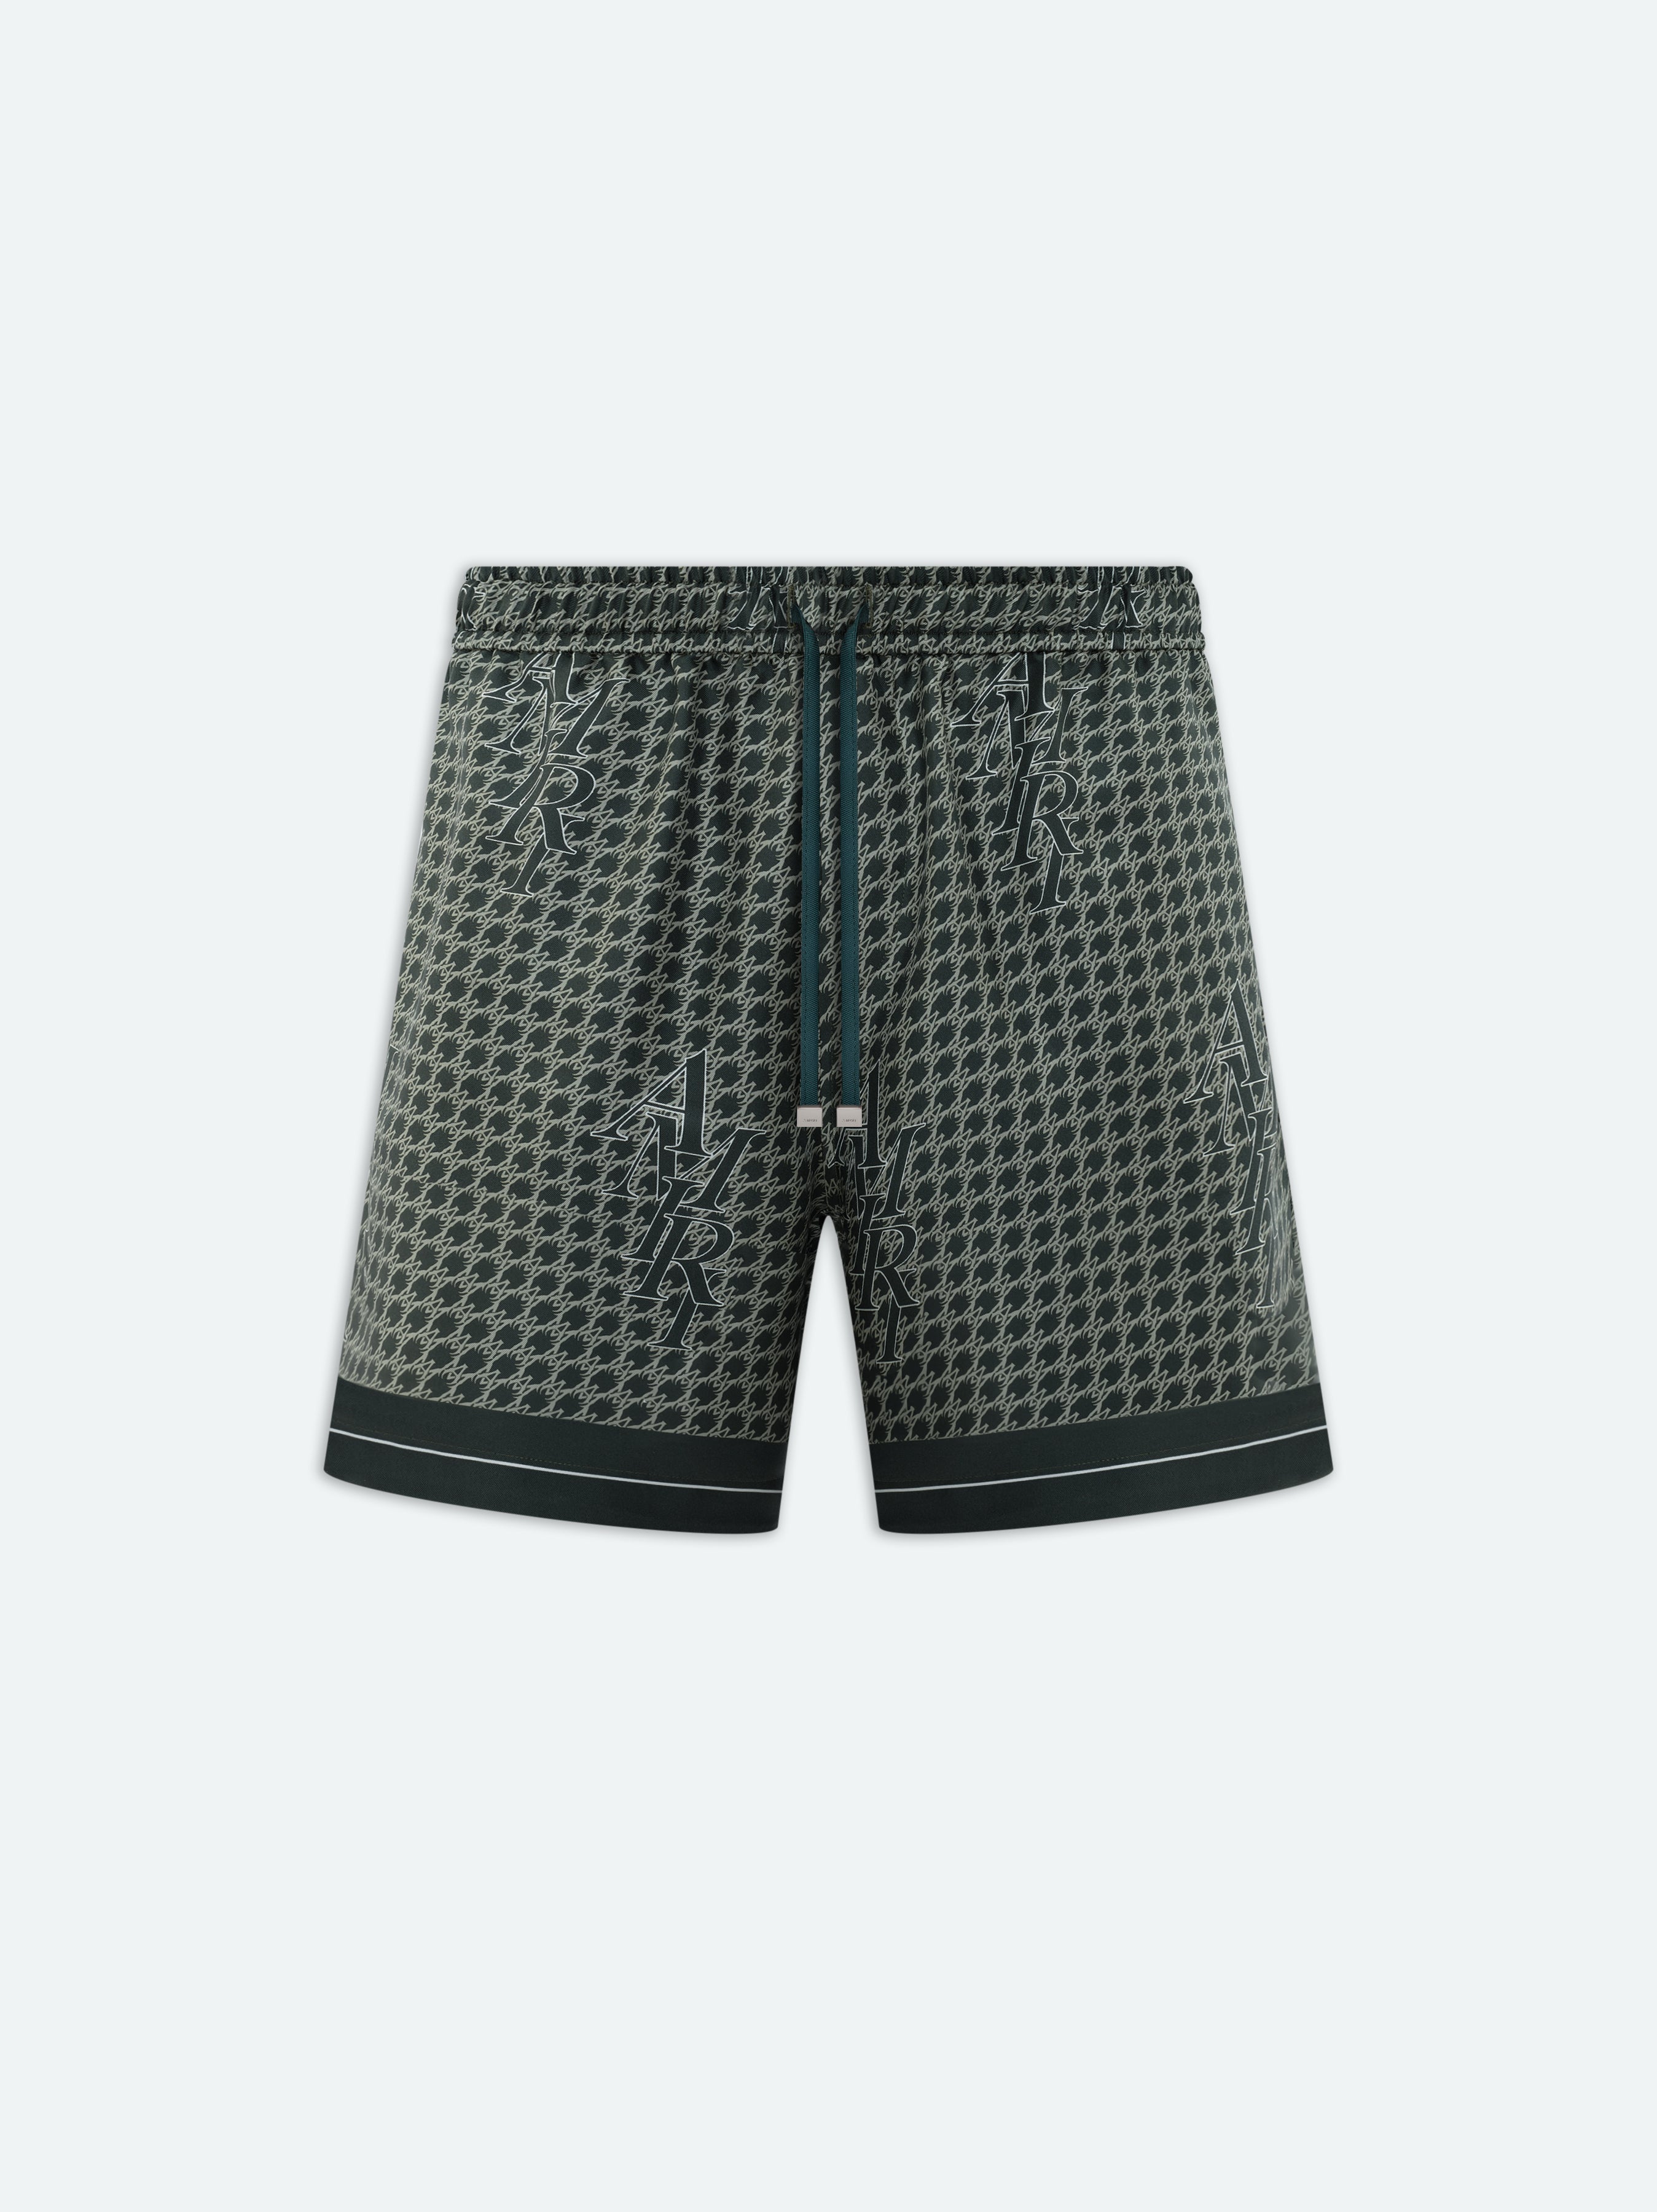 Product STAGGERED AMIRI HOUNDSTOOTH SILK SHORT - Rain Forest featured image